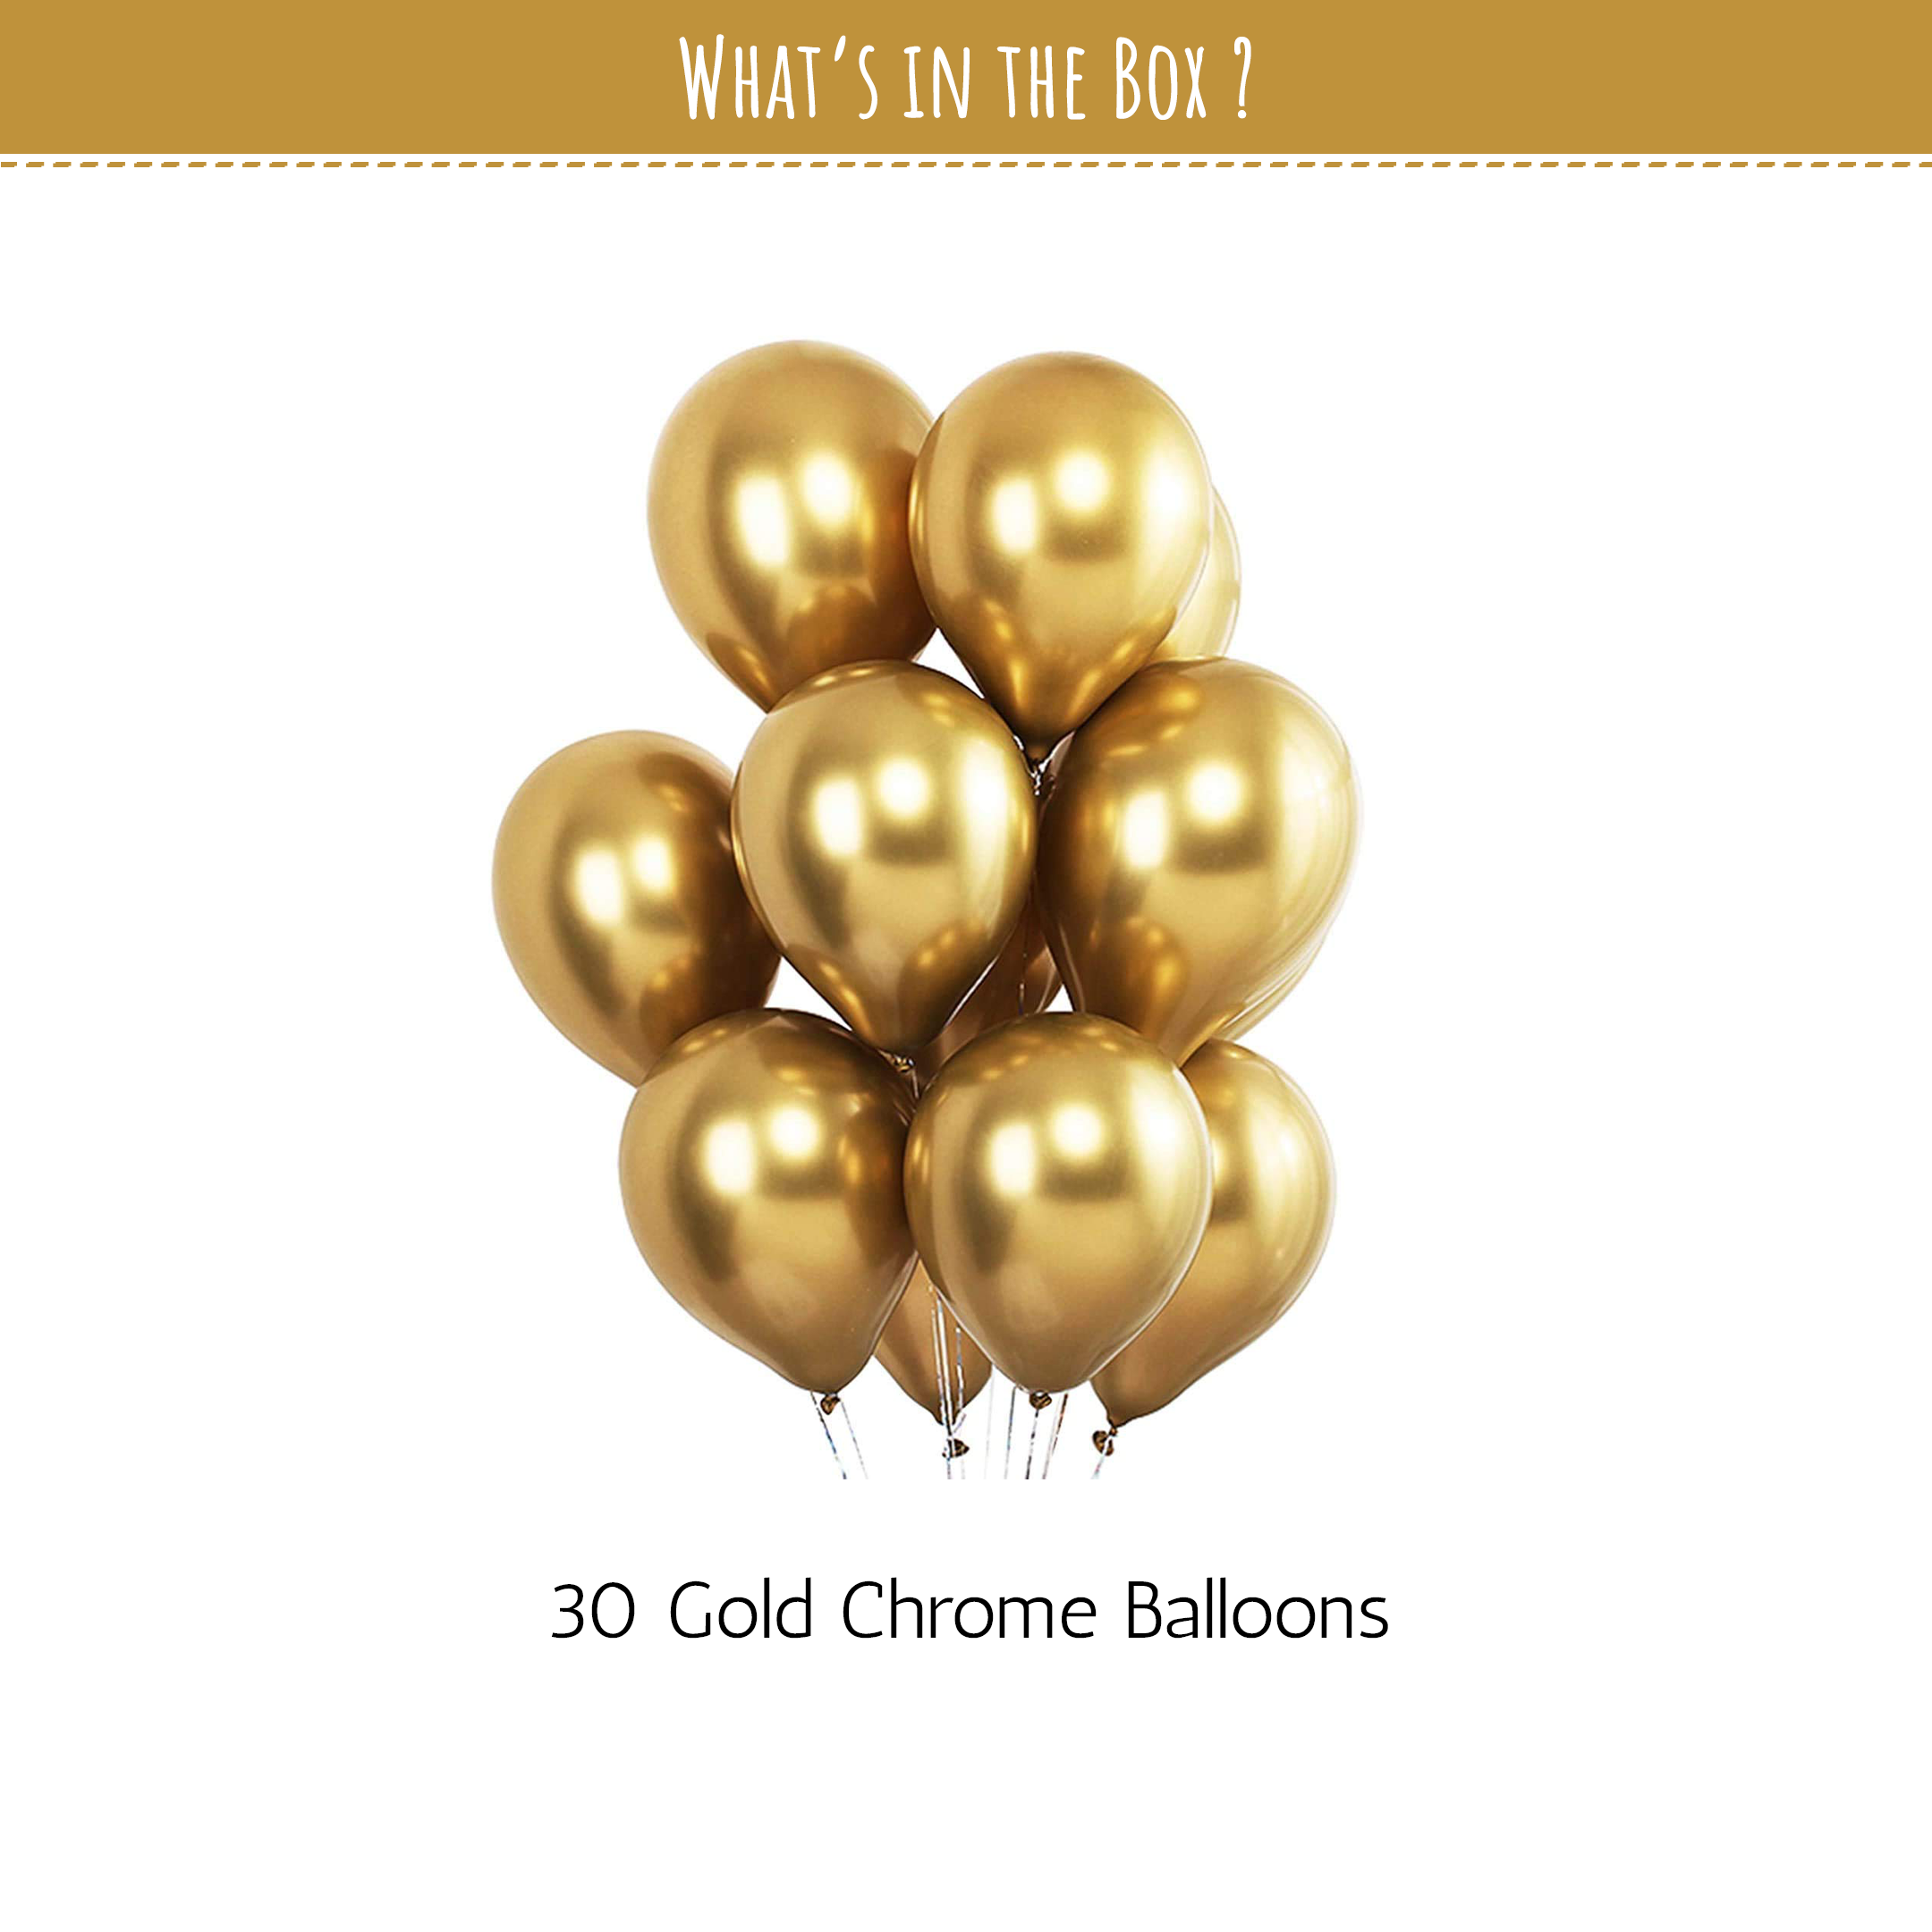 Gold Chrome Balloons party decoration for girls & boys-30pcs